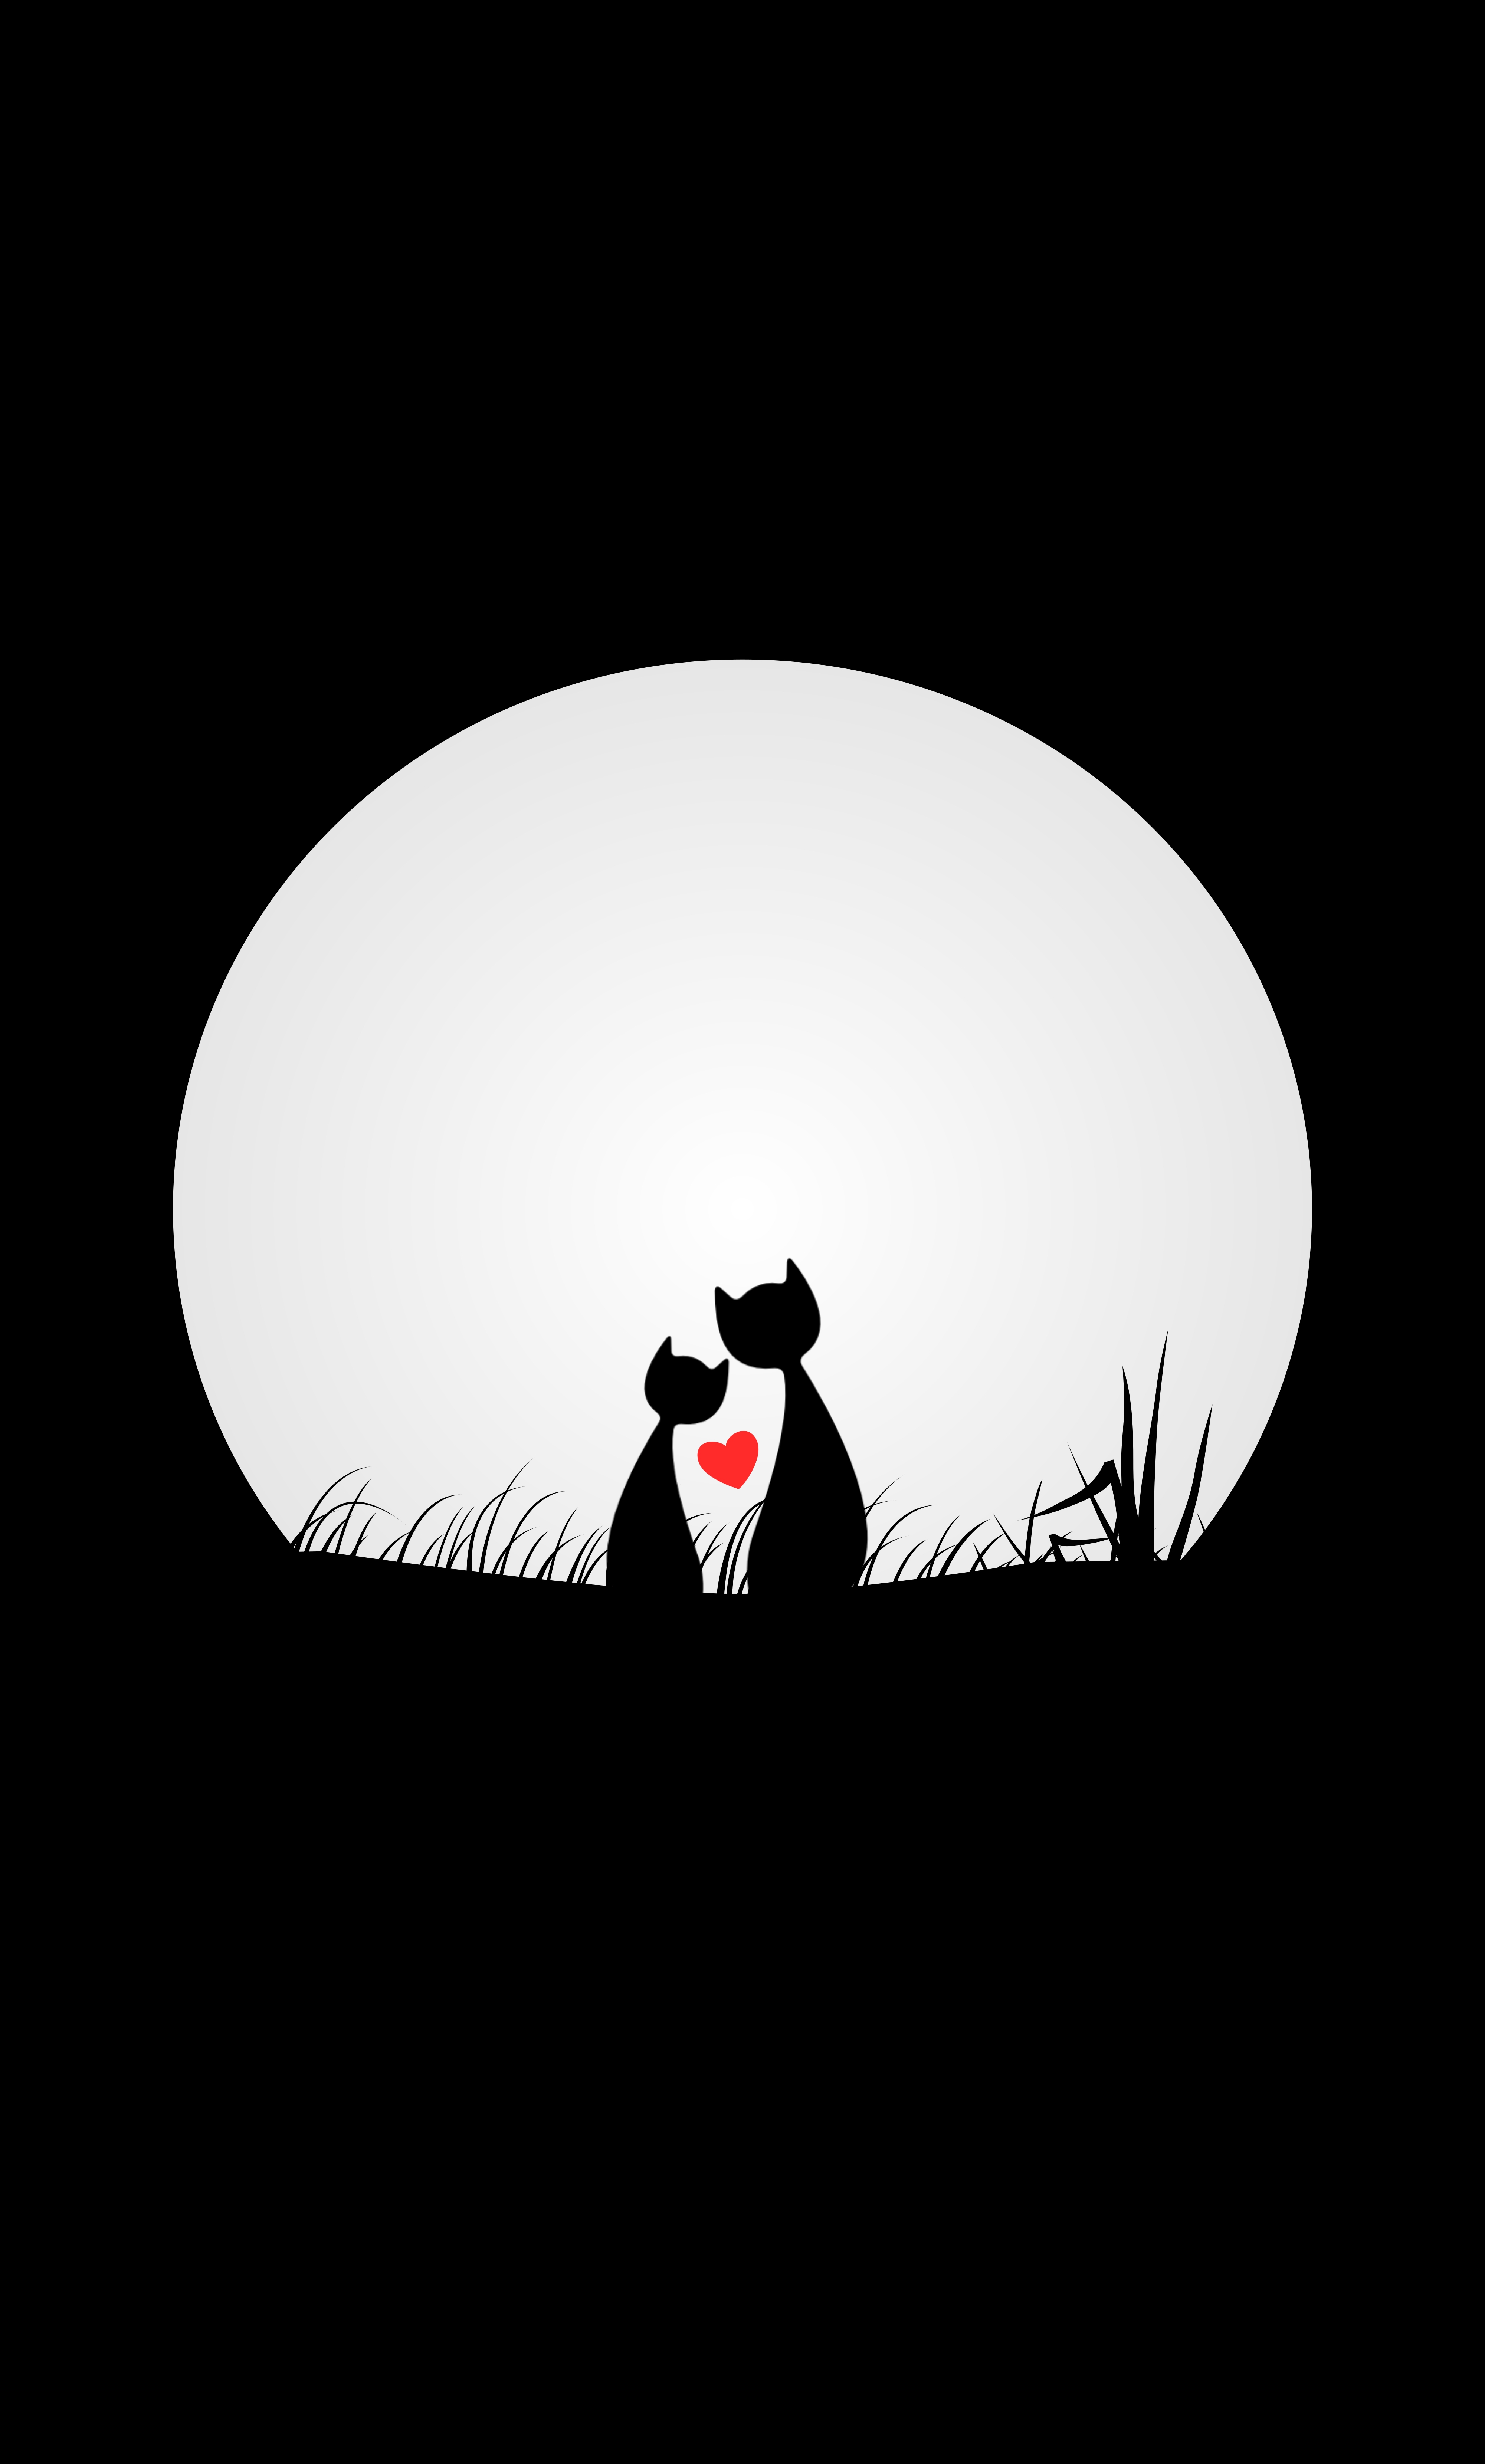 New Lock Screen Wallpapers love, cats, night, moon, vector, silhouettes